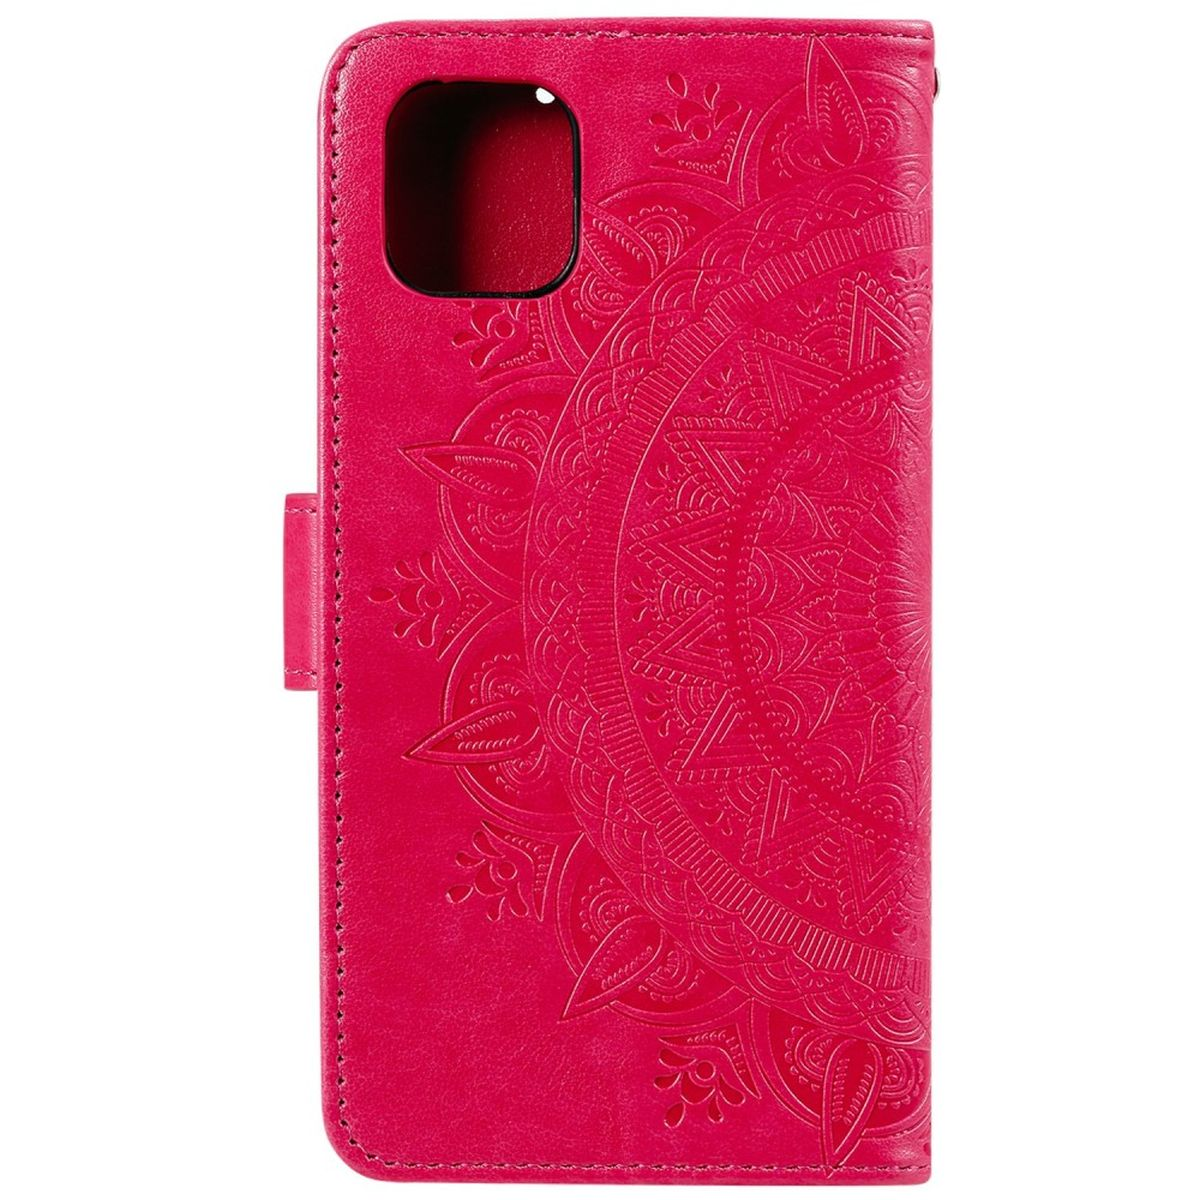 COVERKINGZ Klapphülle mit Mandala Samsung, A03, Muster, Pink Bookcover, Galaxy